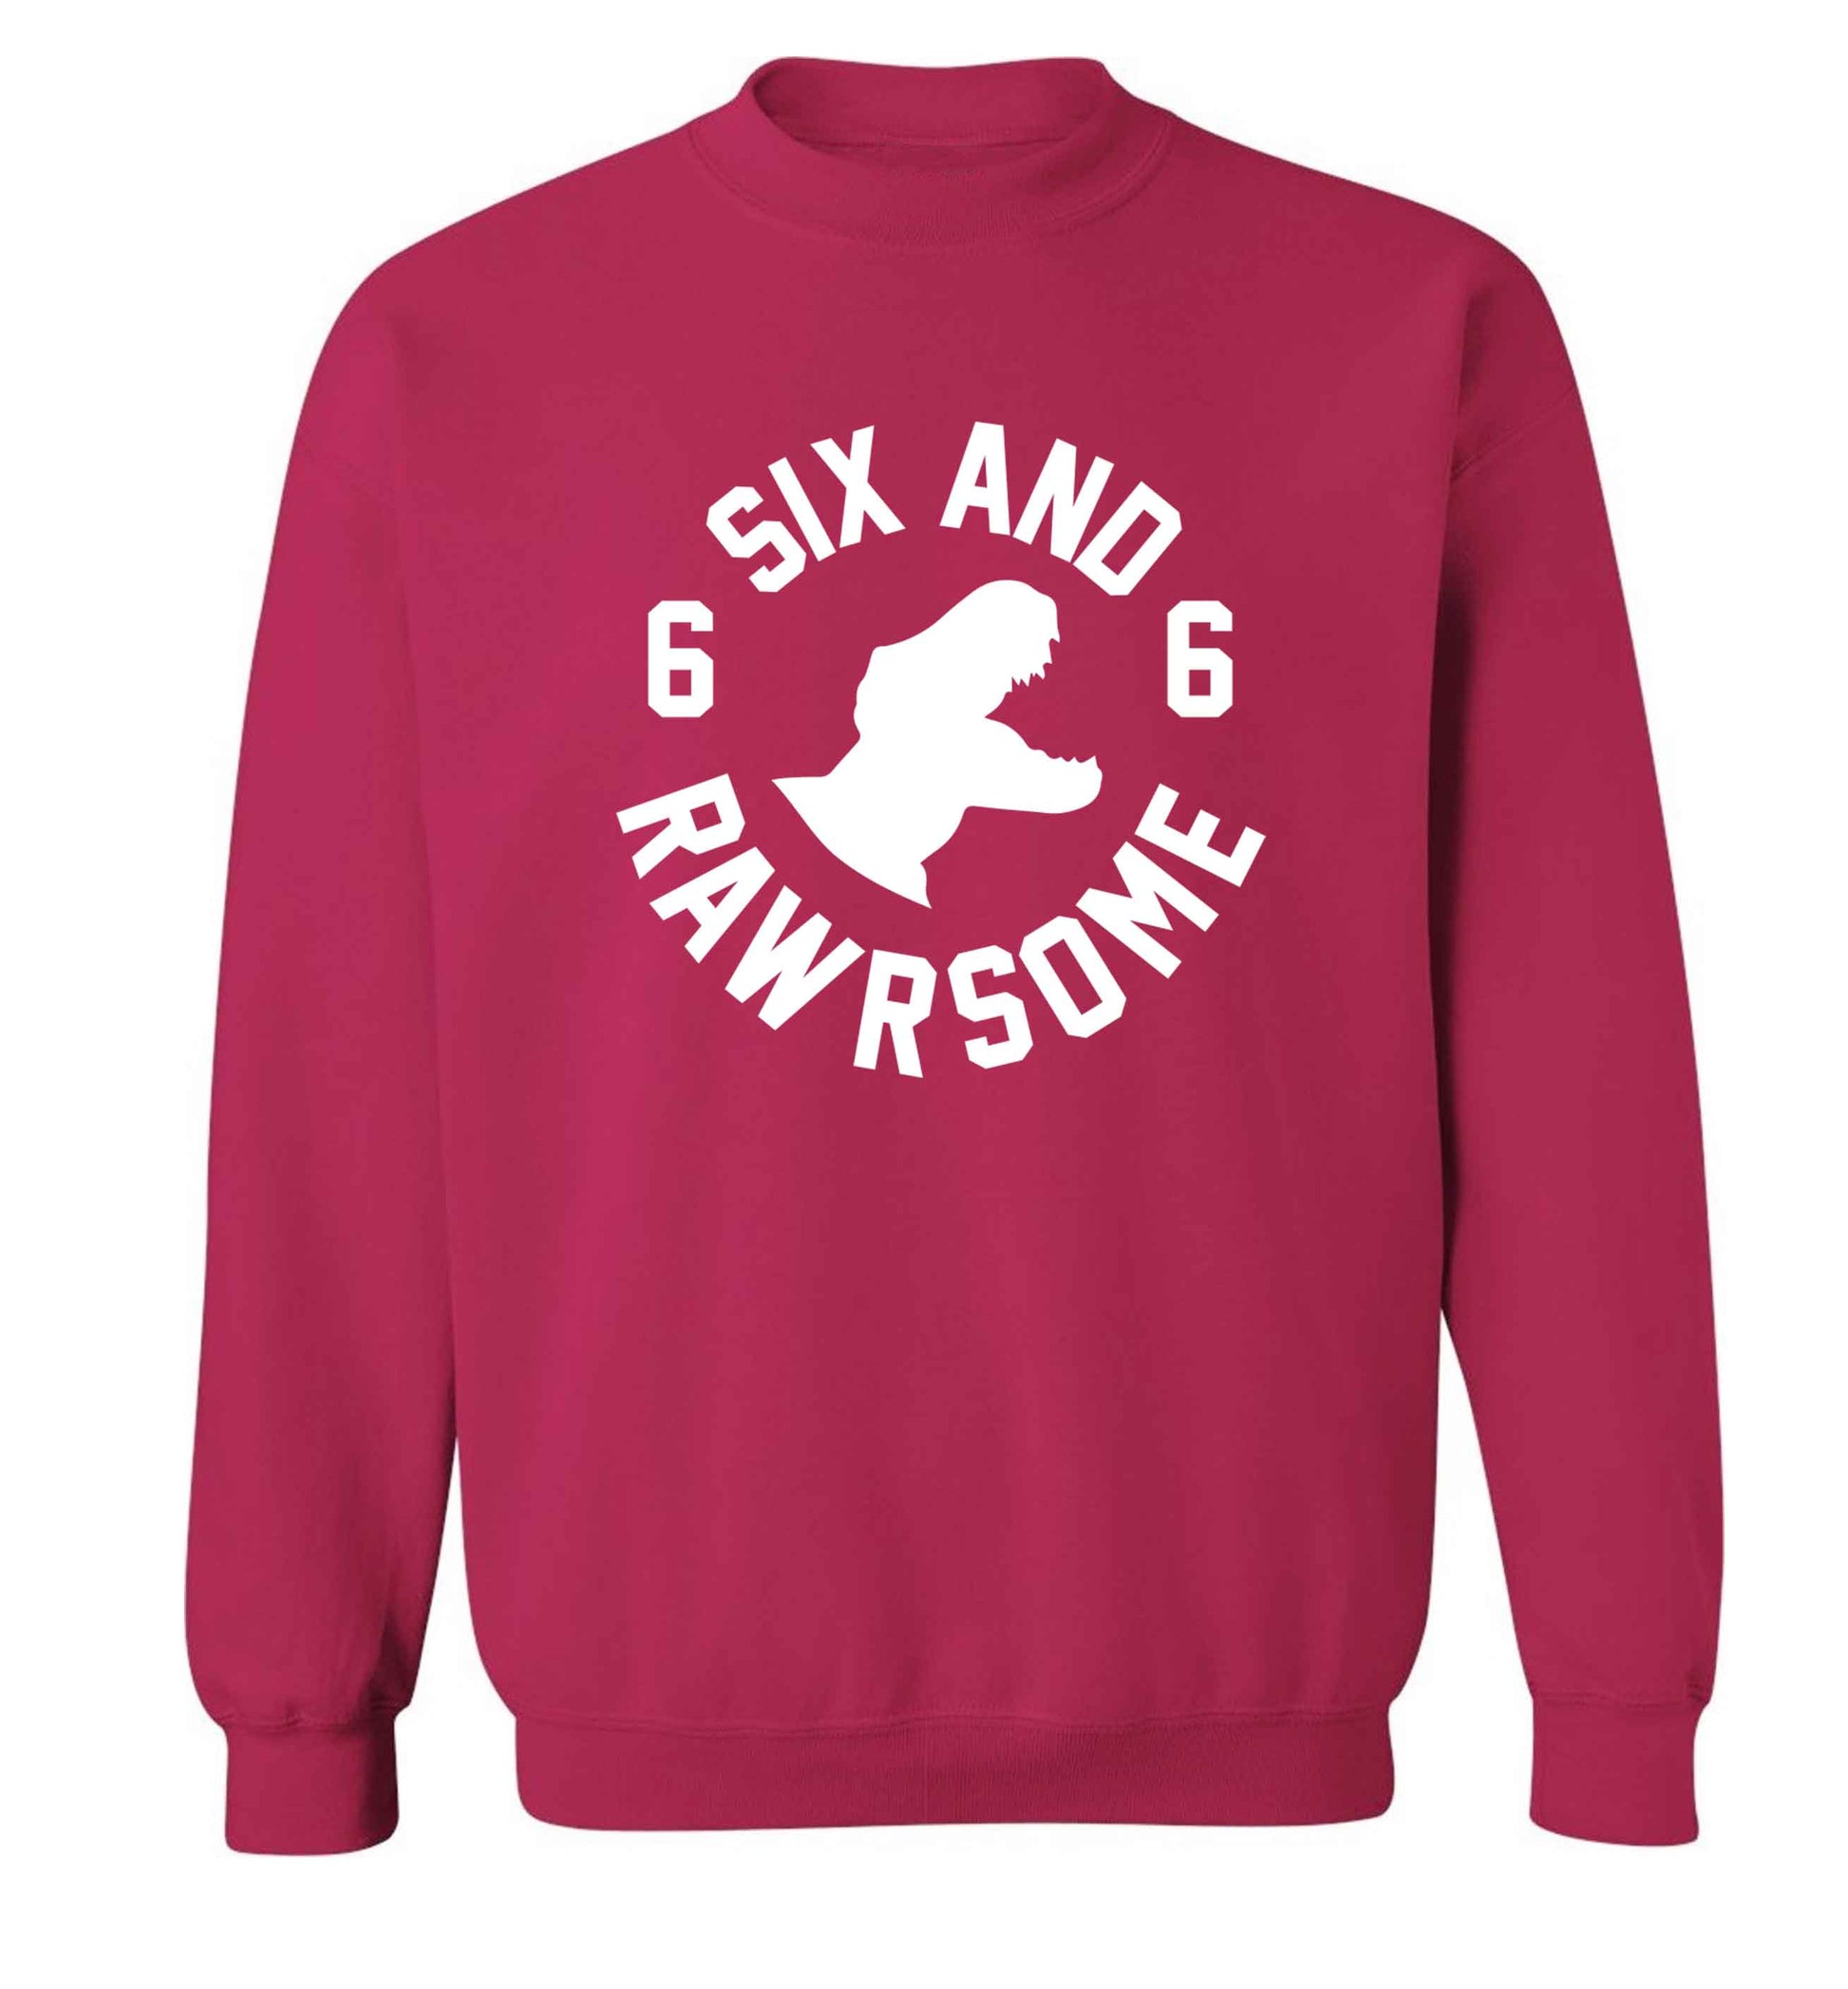 Six and rawrsome adult's unisex pink sweater 2XL